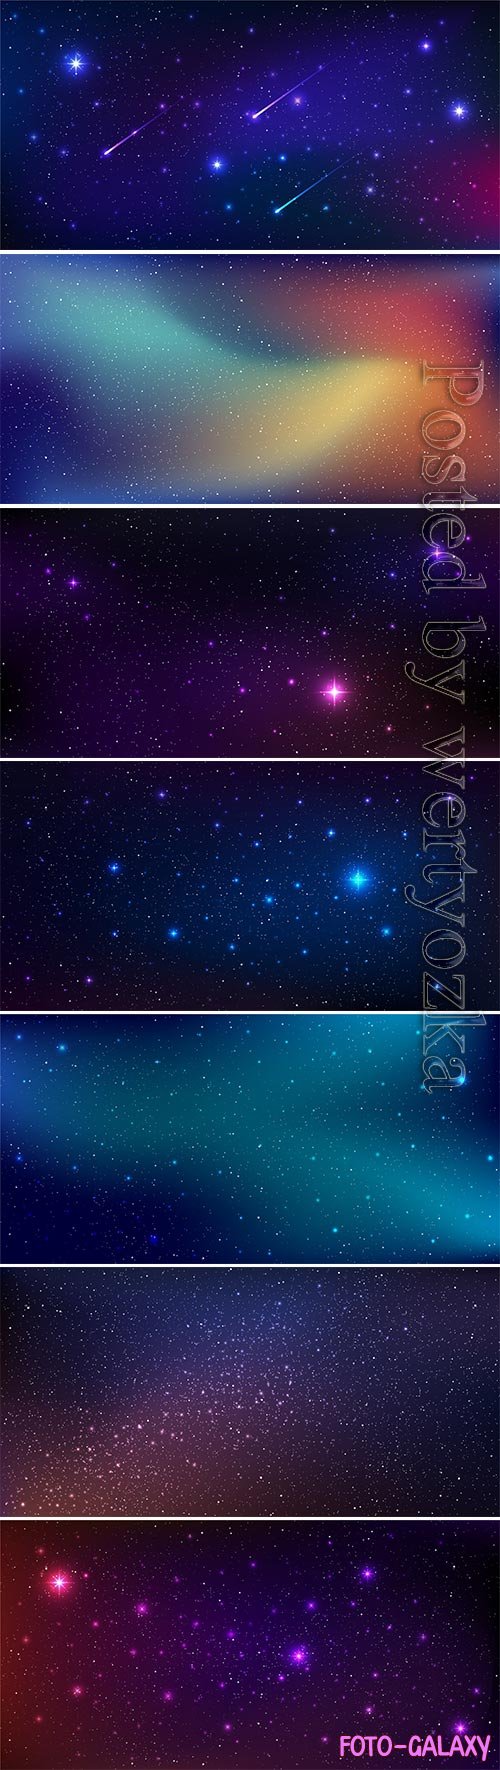 Galaxy illustration with stardust and bright shining stars